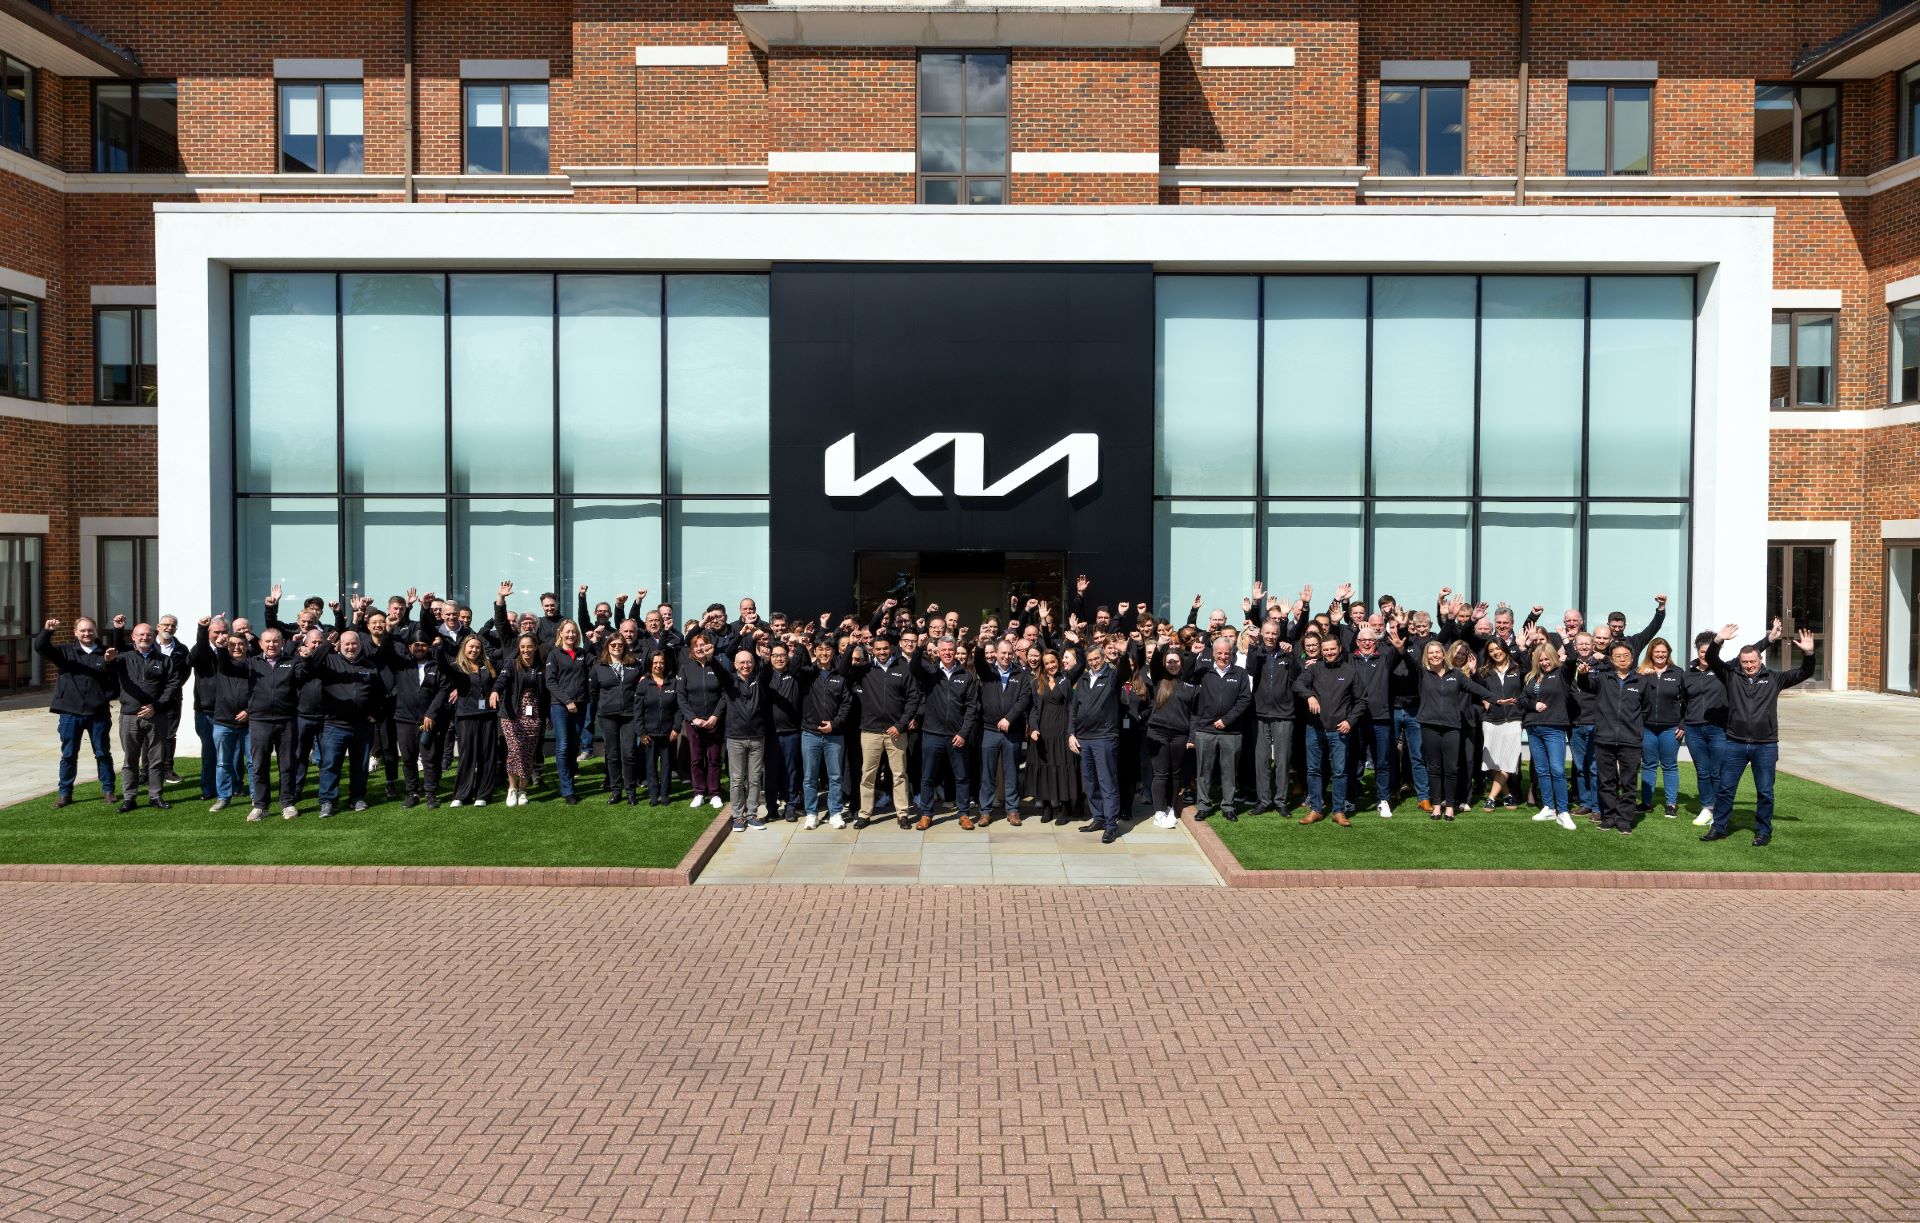 Kia UK Continues to Shine as a Top Employer with Great Place To Work Certification